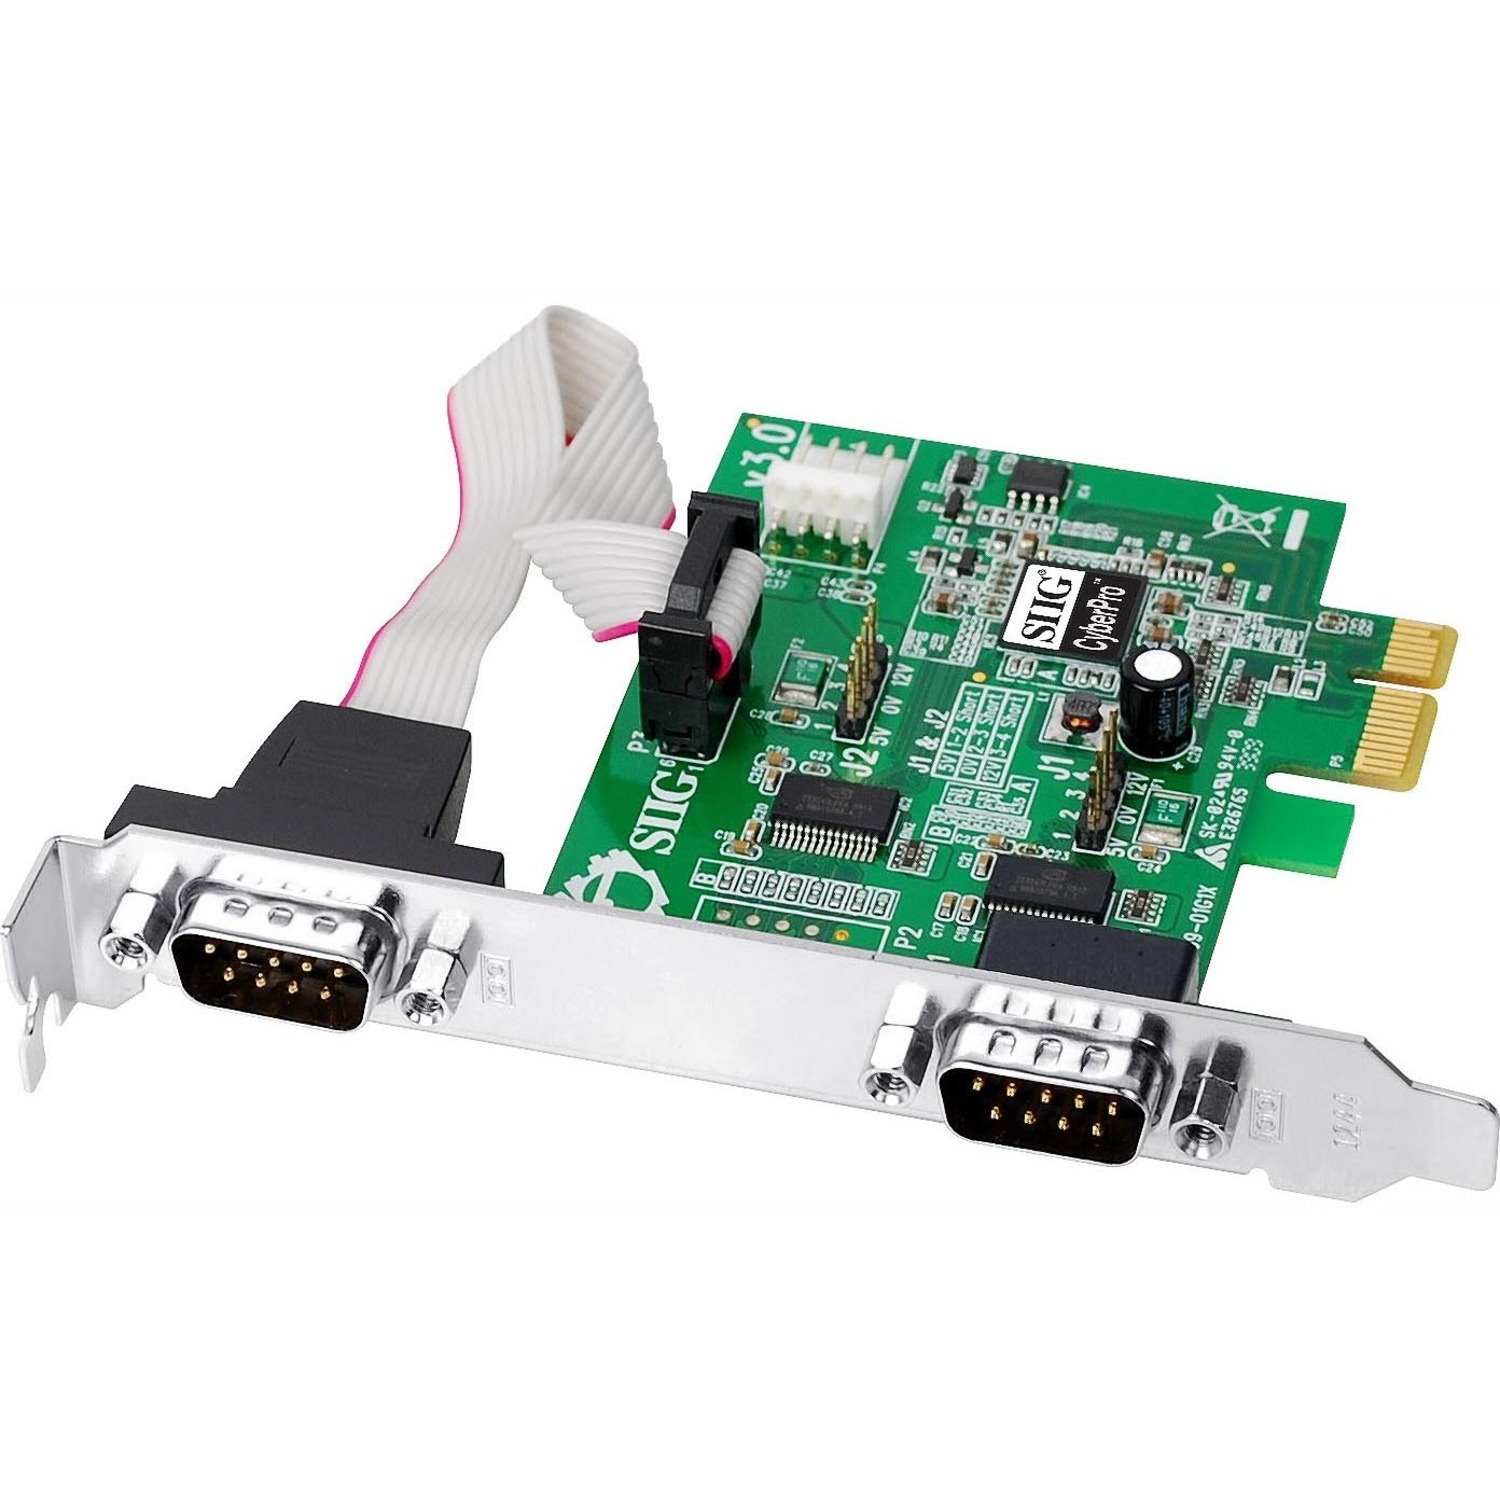 SIIG CyberSerial 2-port PCI Express Serial Adapter